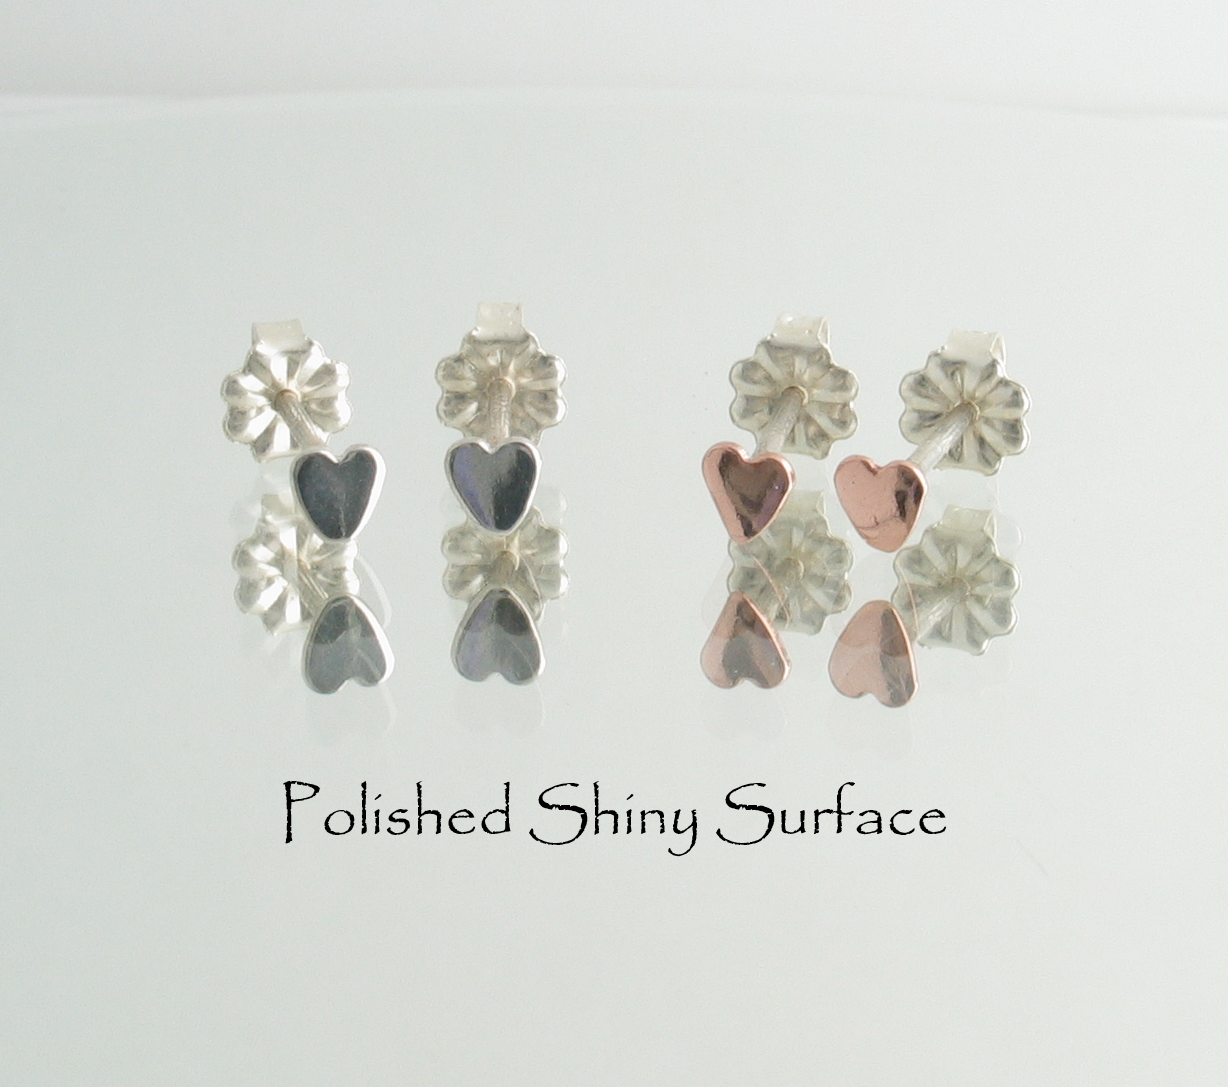 Tiny Heart Stud Earrings in Sterling Silver or Copper with Sterling Silver Posts and ​Butterfly Wirenuts